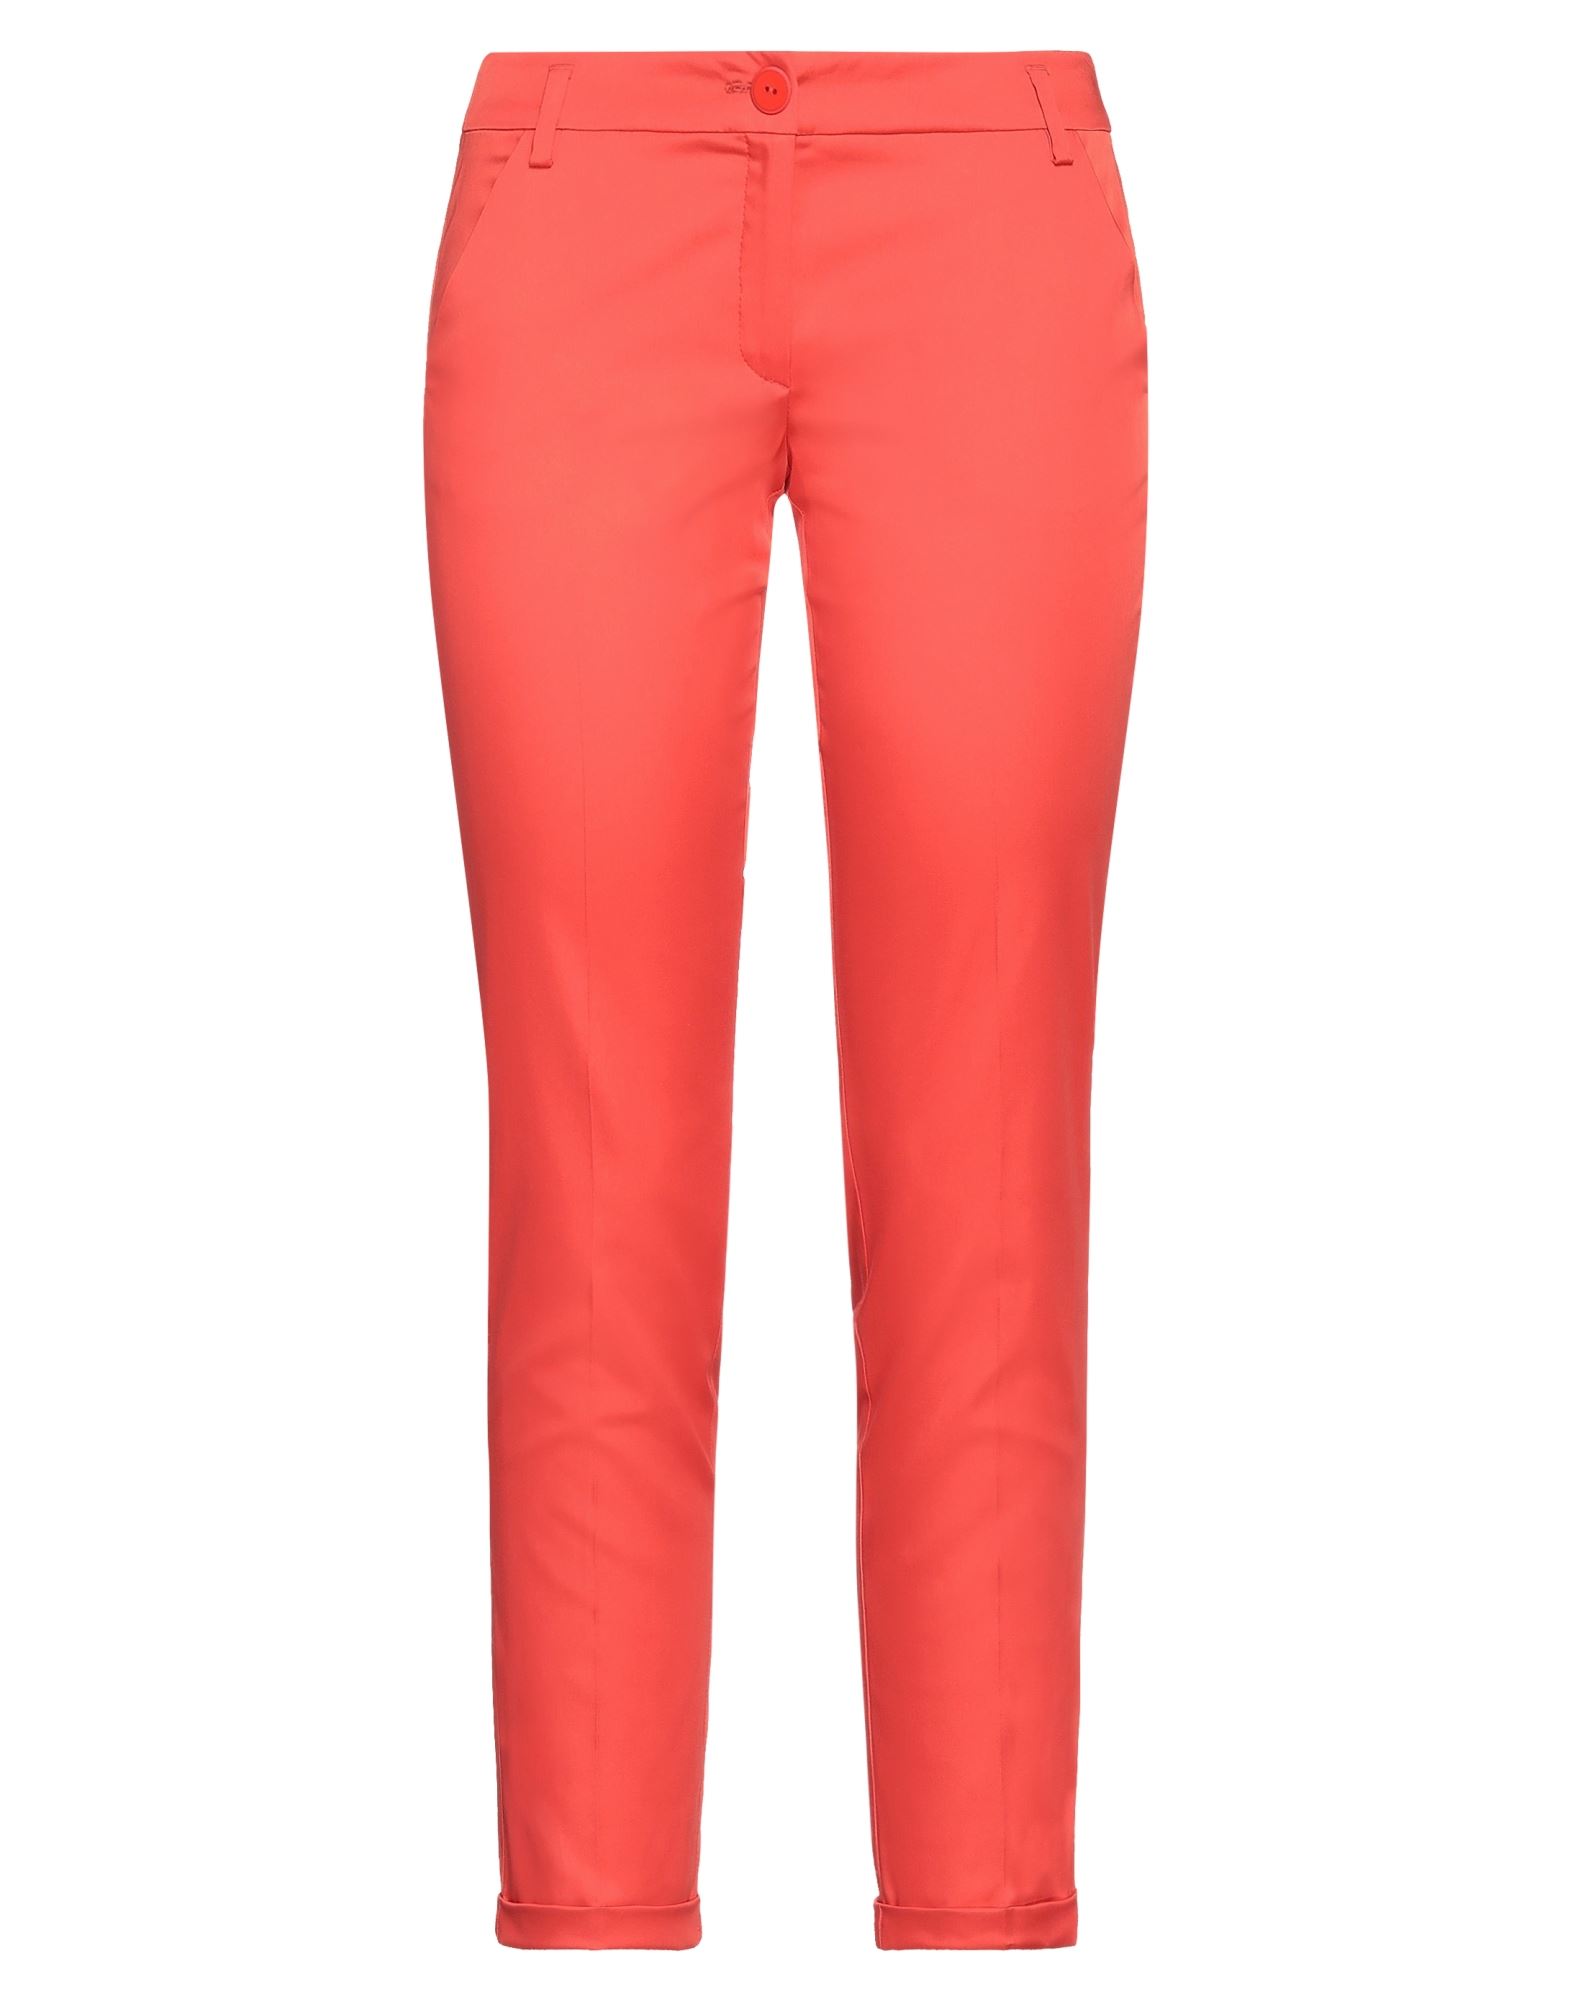 EMME by MARELLA Pants